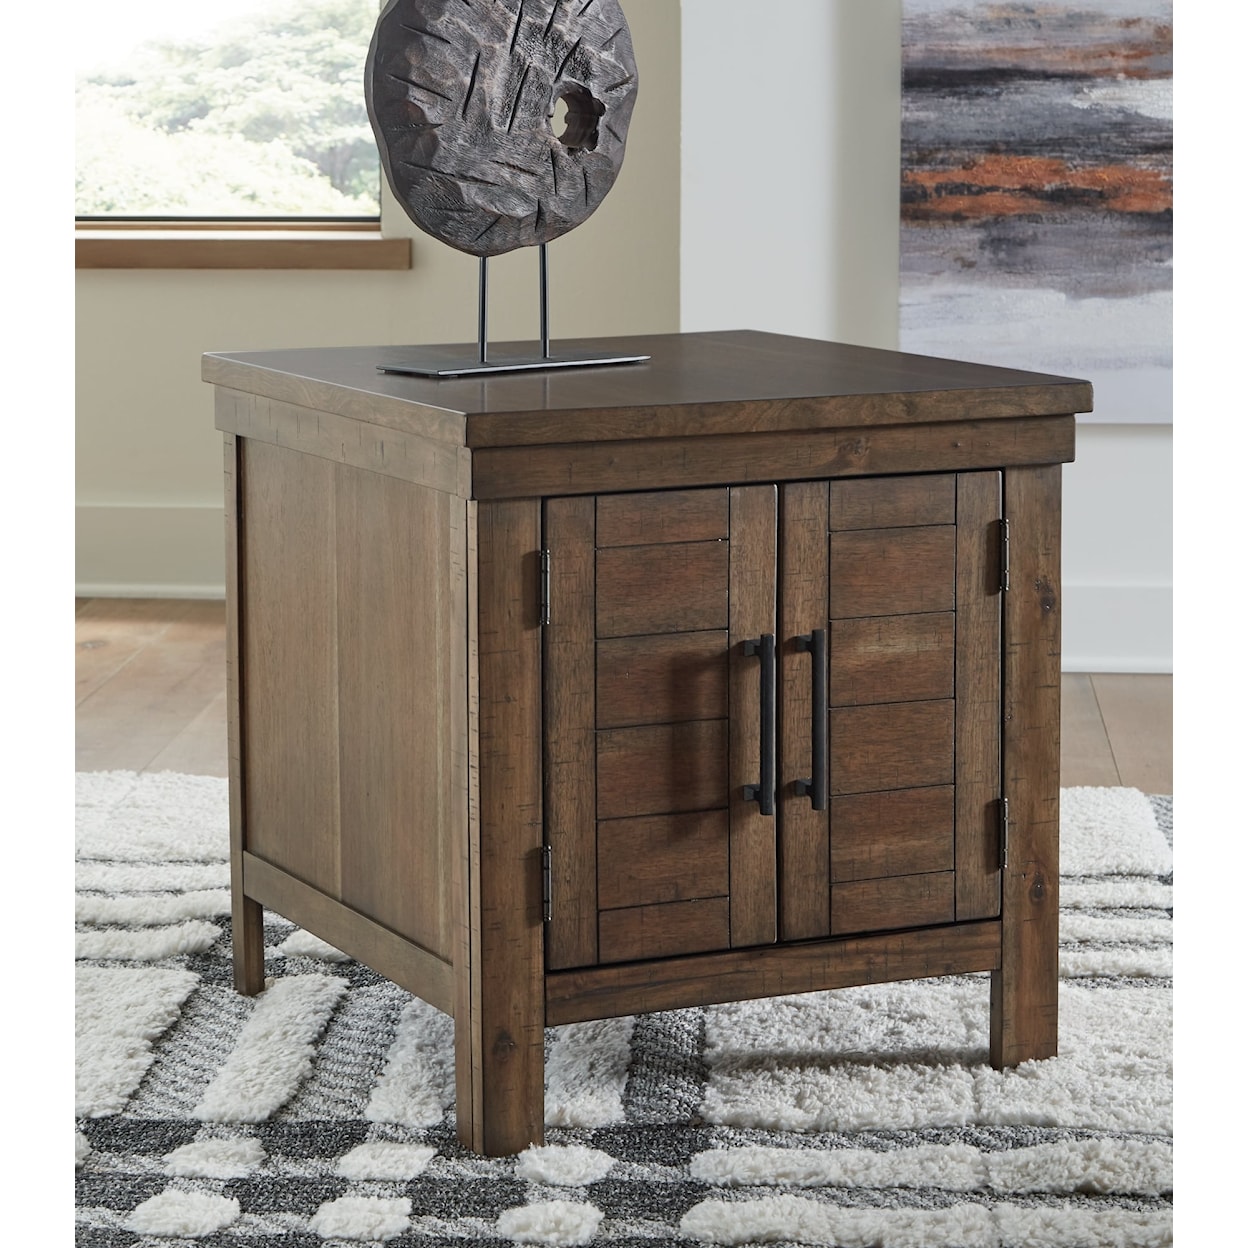 Signature Design by Ashley Moriville Rectangular End Table